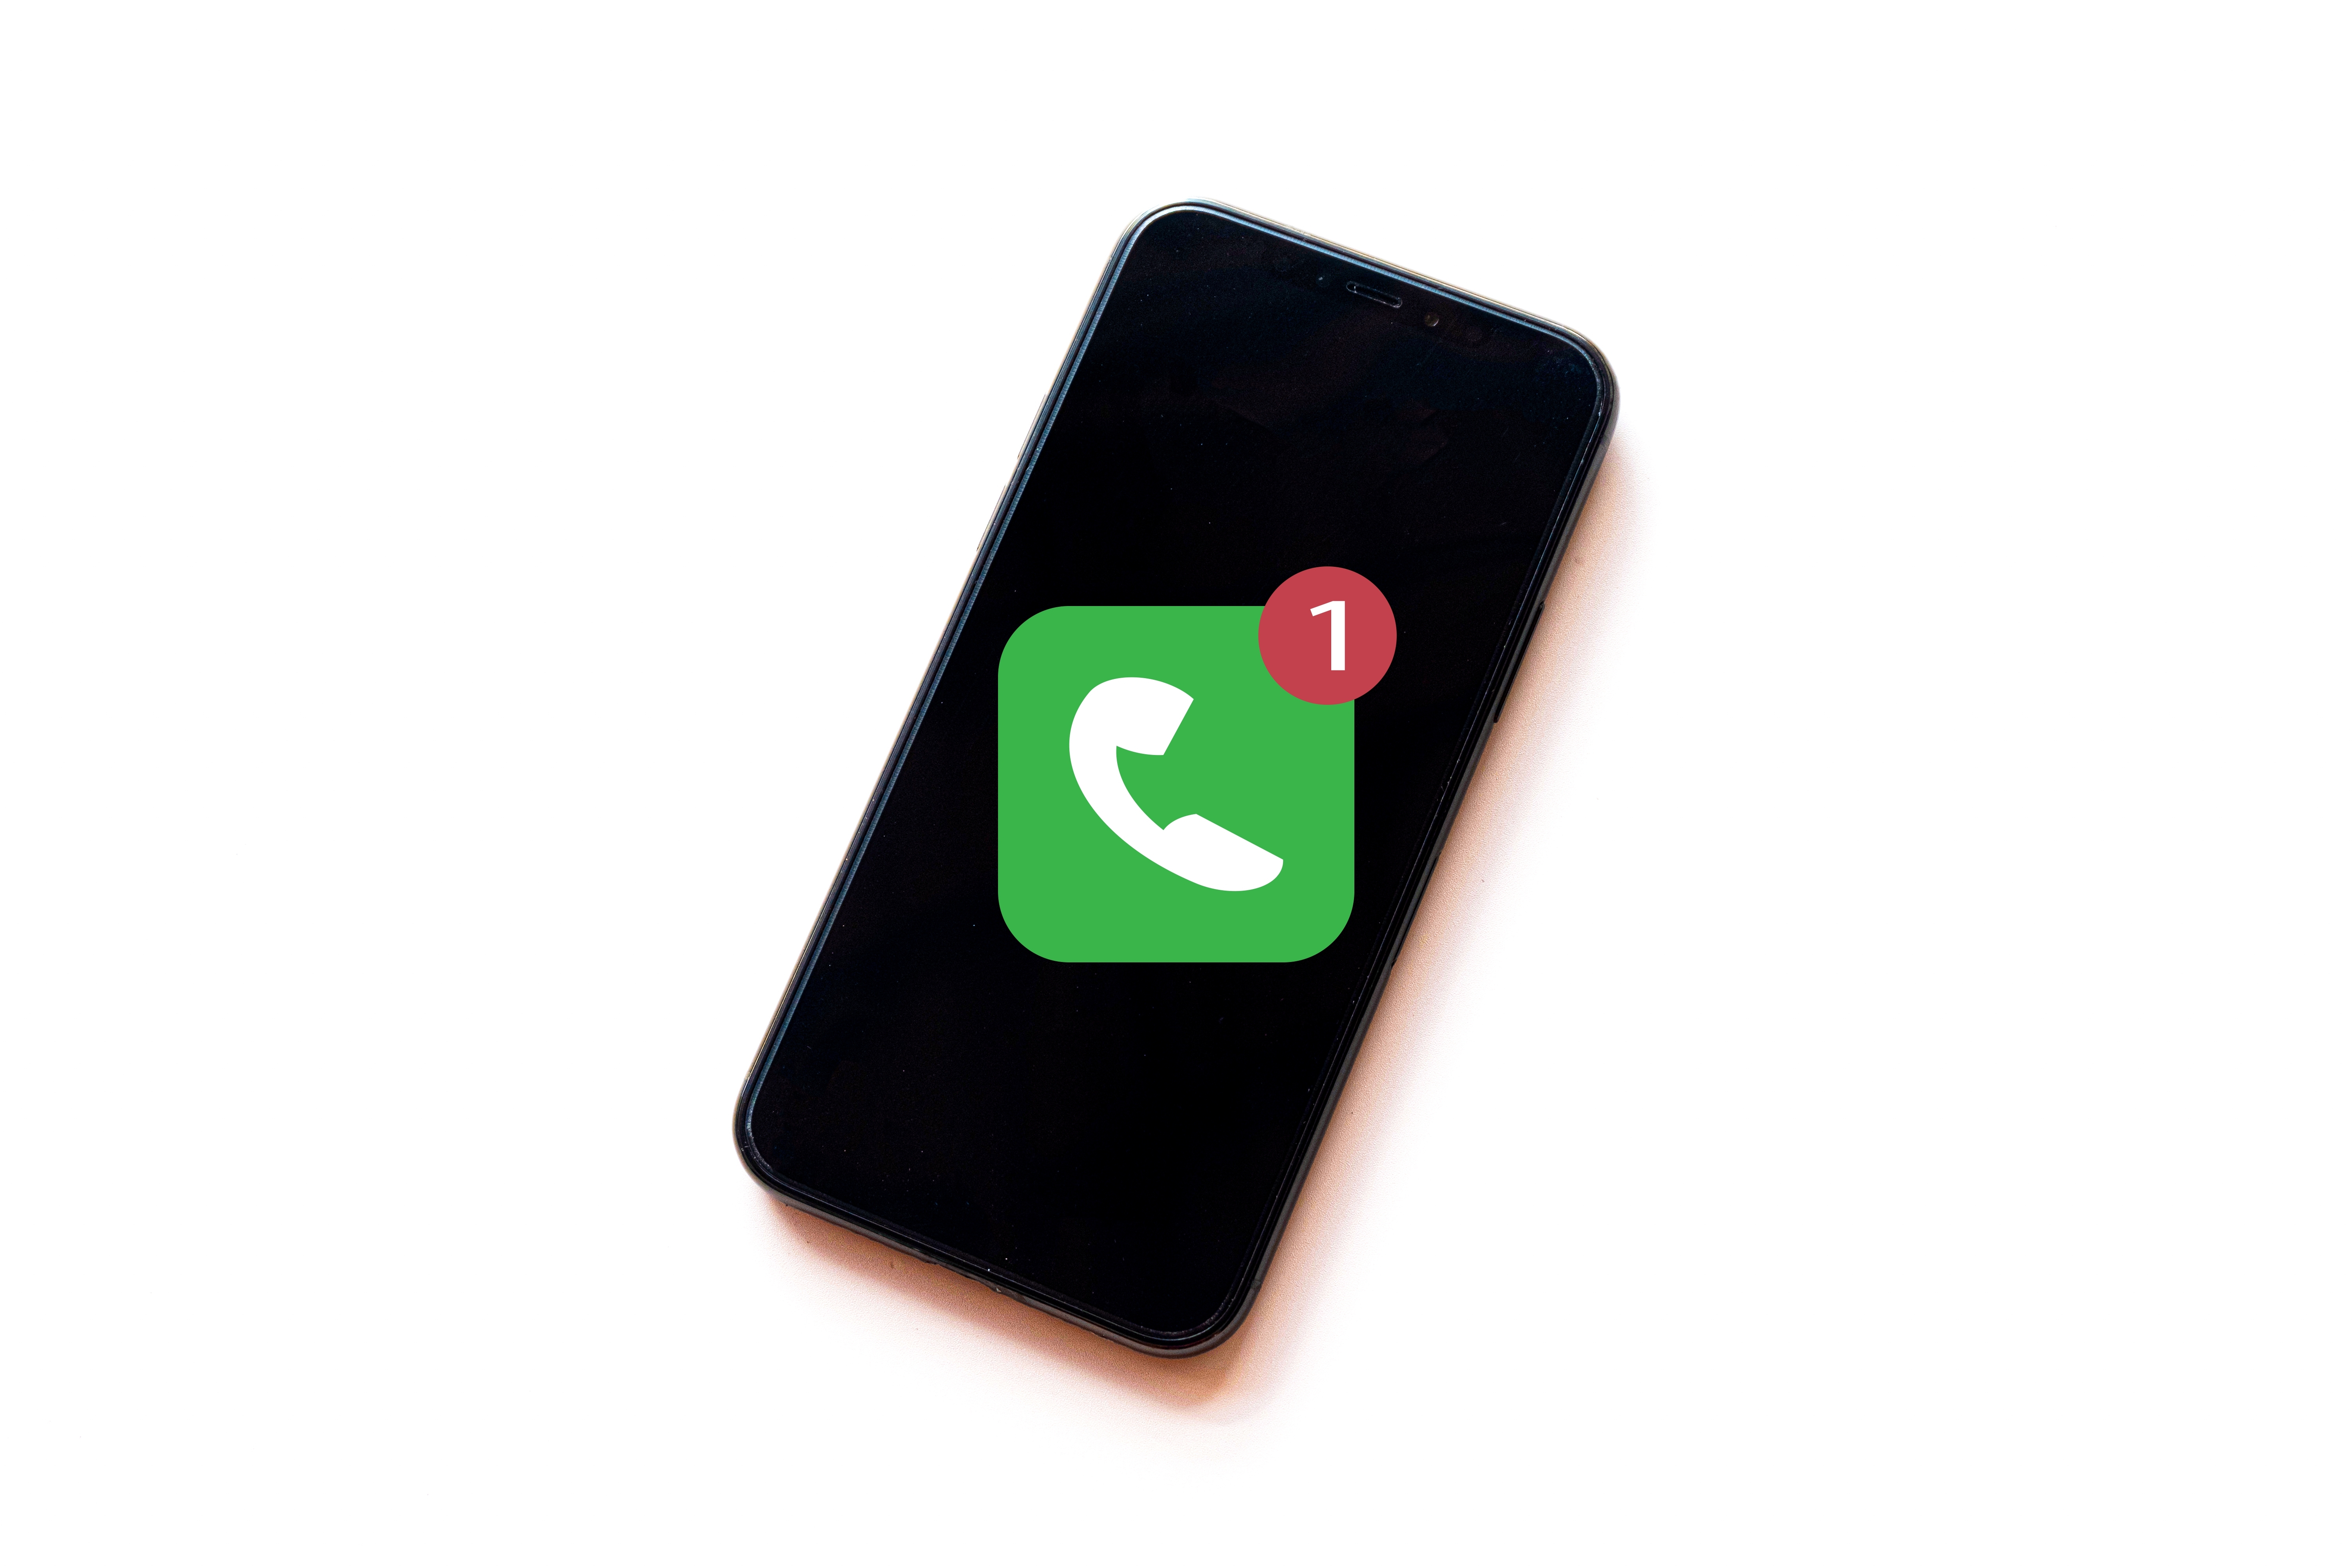 A missed call notification | Source: Shutterstock